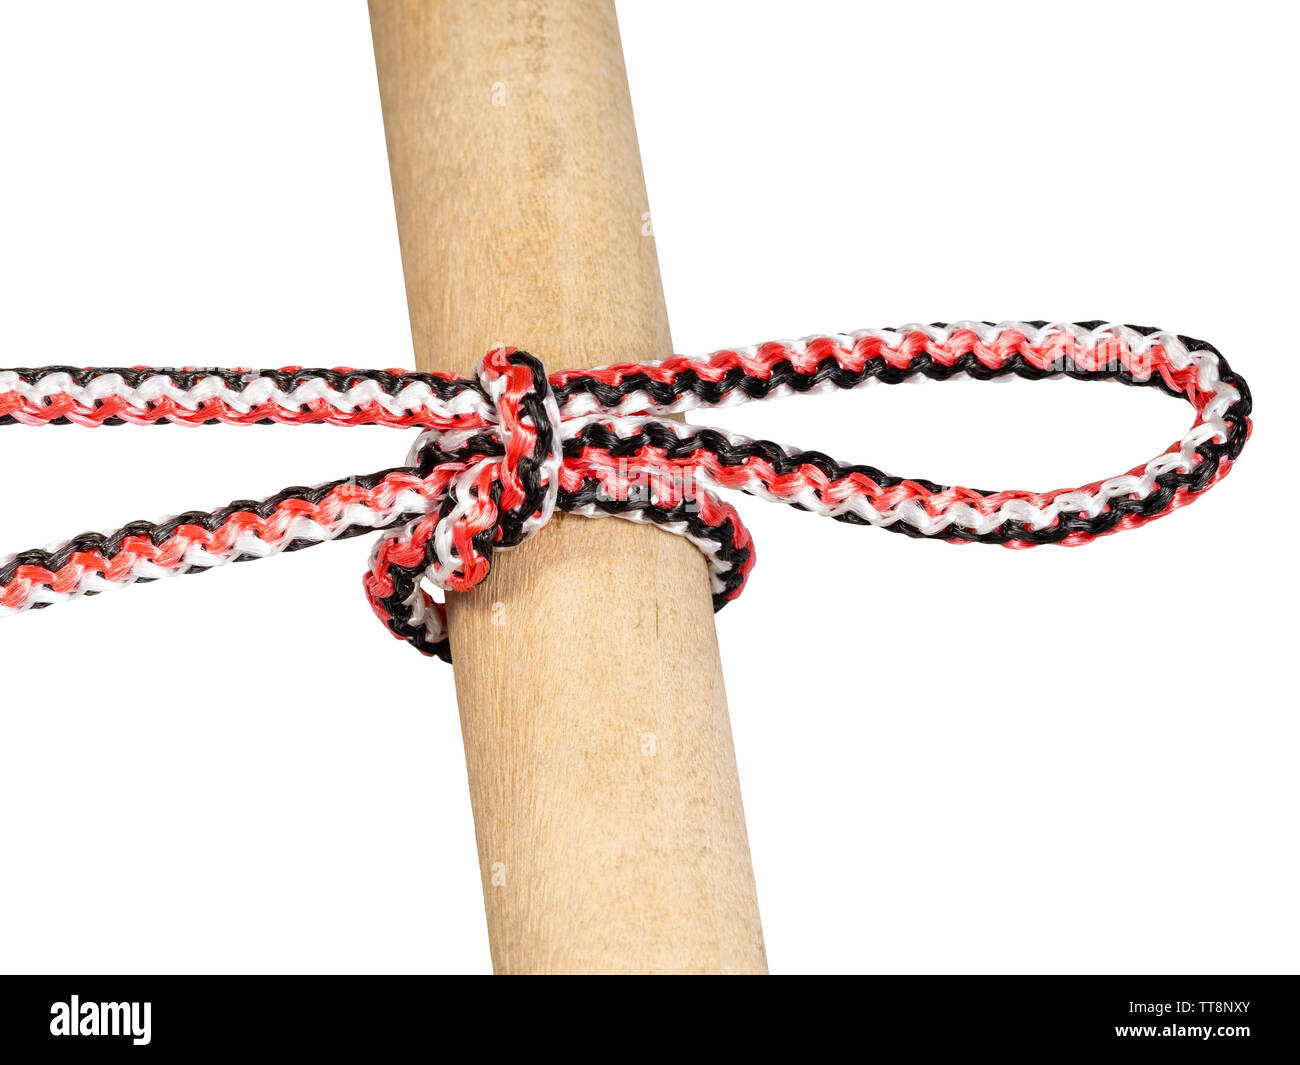 another side of Singly slipped reef knot tied on synthetic rope cut out on white background Stock Photo